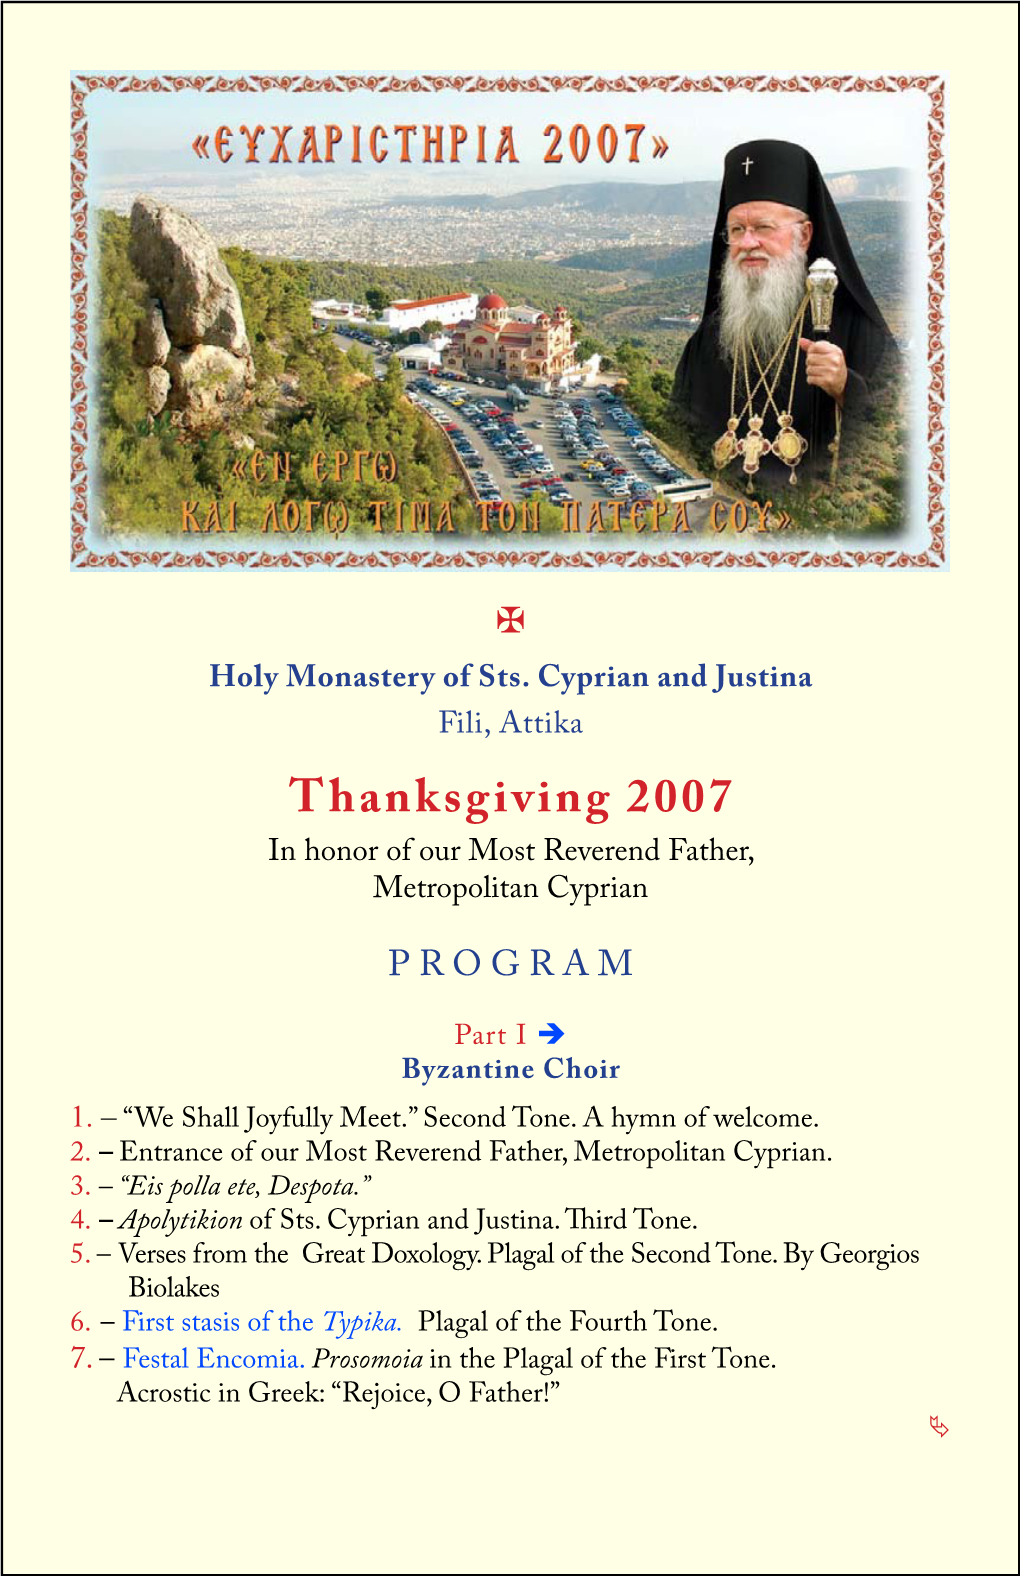 Full Text of "Thanksgiving 2007" in English